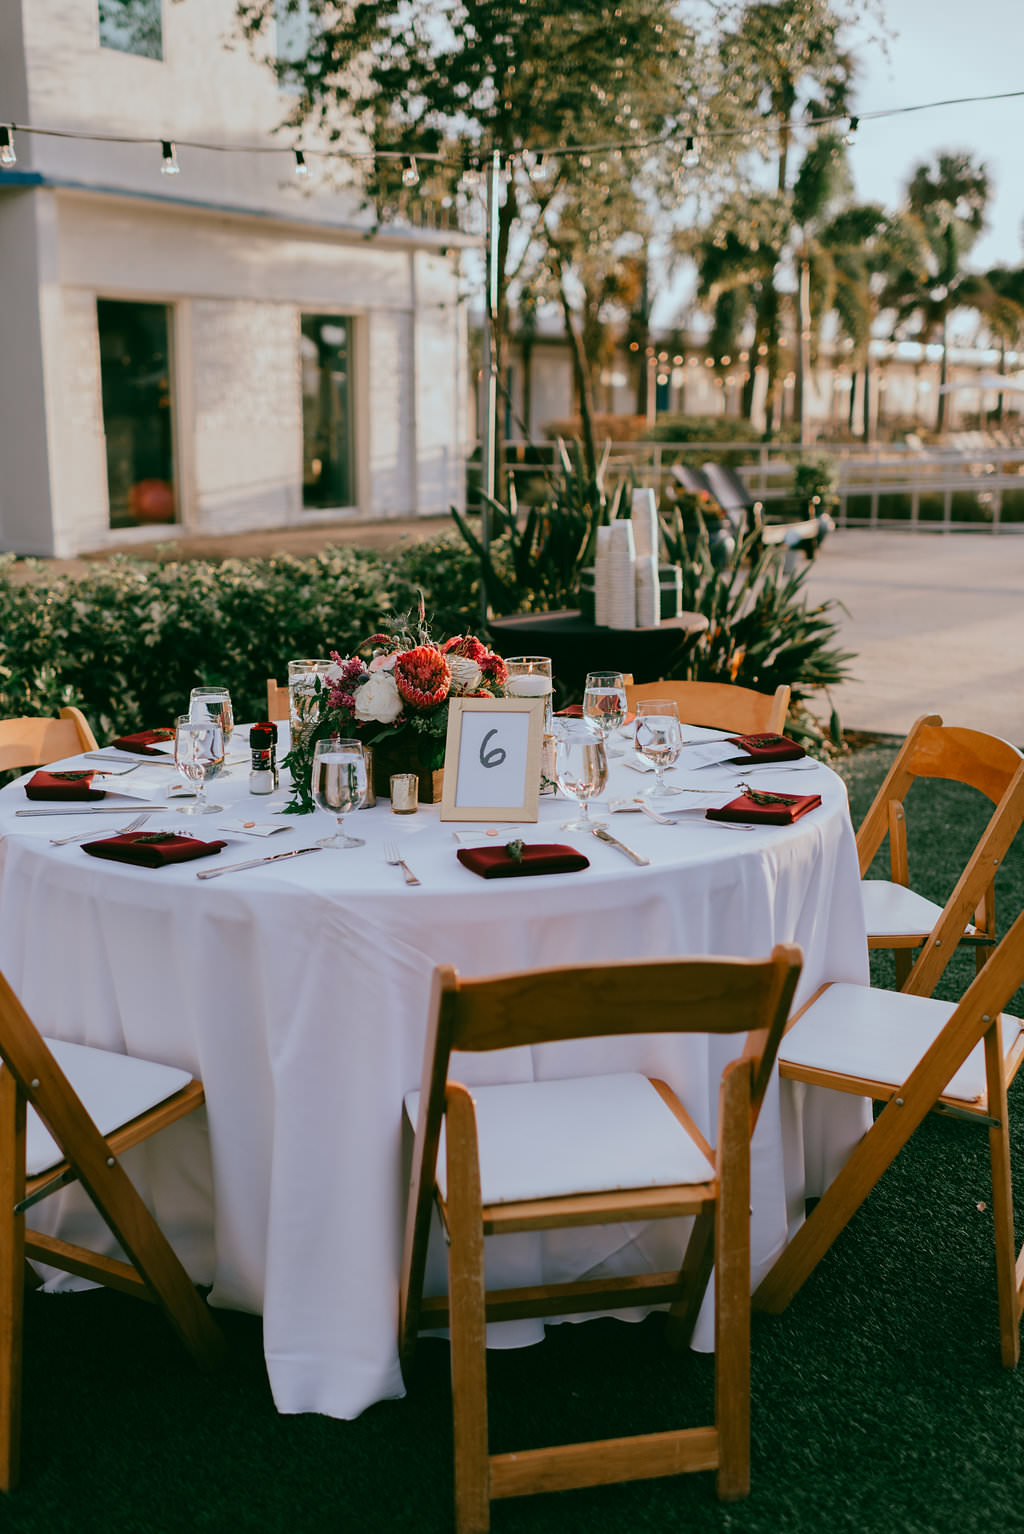 Outdoor Garden Lawn Wedding Reception Decor, Round Table, White Tablecloths, Burgundy Linens, Wooden Folding Chairs with White Cushions, Gold Frame Table Number and Low Ivory, Red and Greenery Floral Bouquet Centerpiece | St. Petersburg Wedding Venue Postcard Inn on the Beach